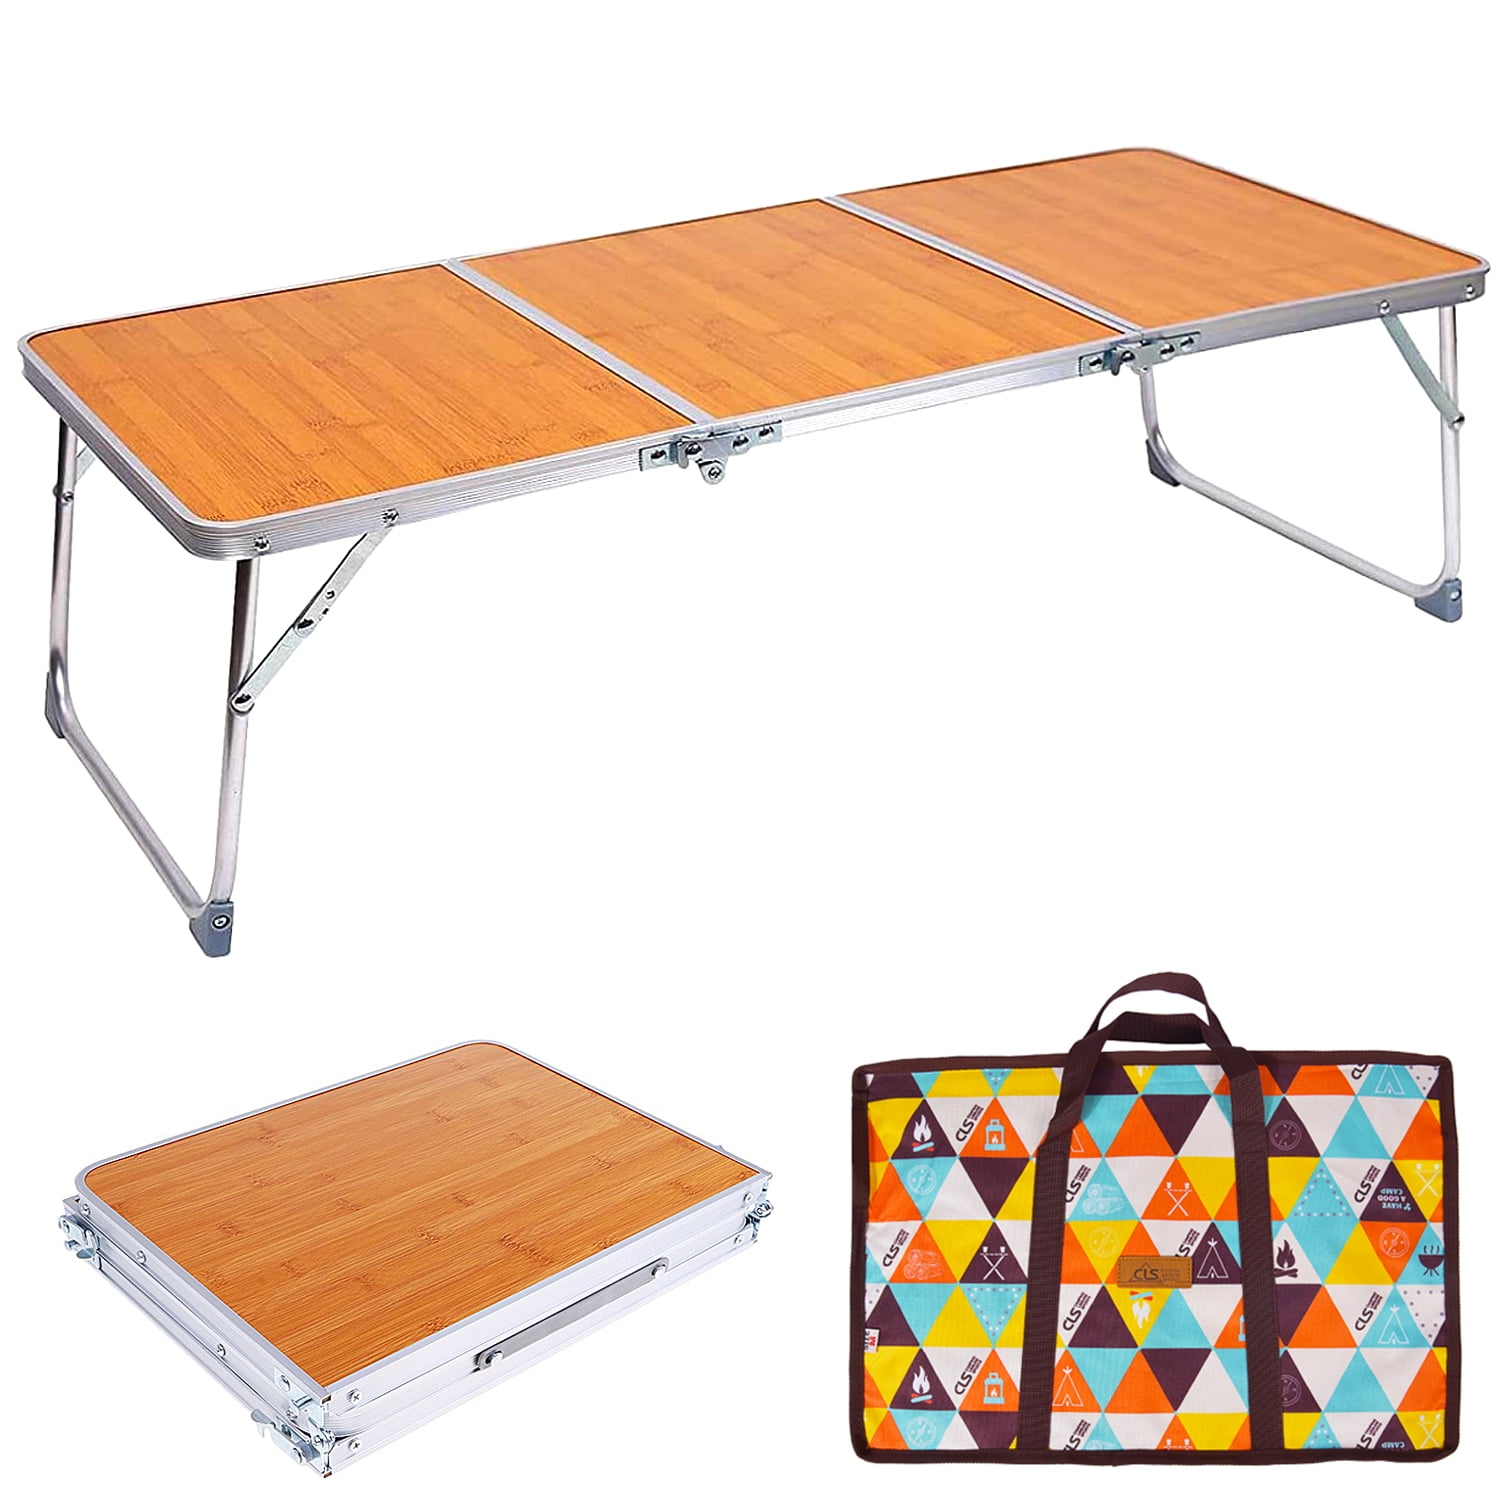 Portable Camping Table Outdoor Picnic Tables Lightweight Tailgating Camper RV 